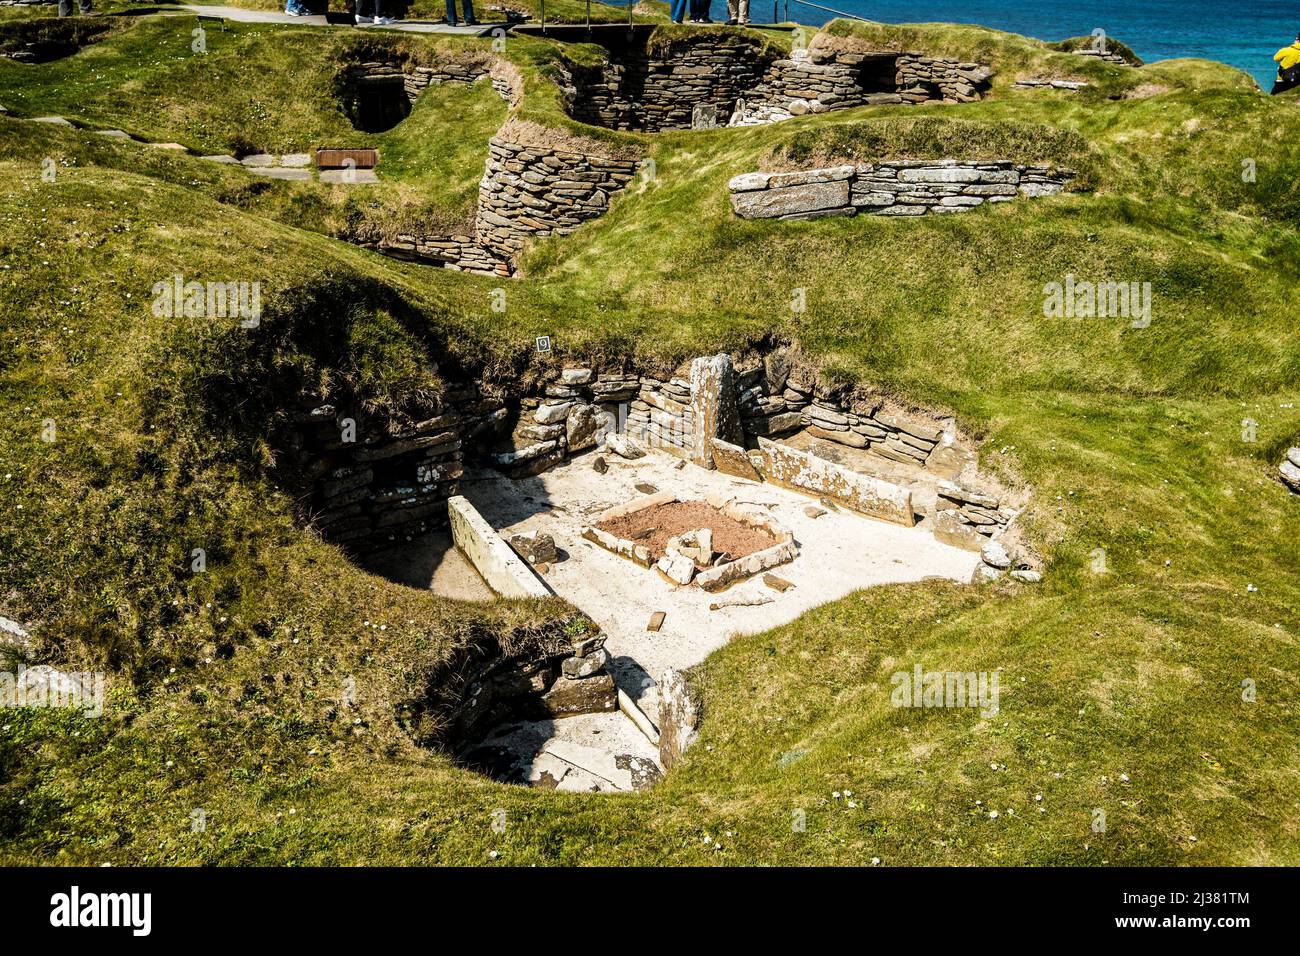 Early houses. Skara Brae Neolithic Archaeological Site. Bay of Skaill, Orkney Islands, Scotland, United Kingdom. Stock Photo